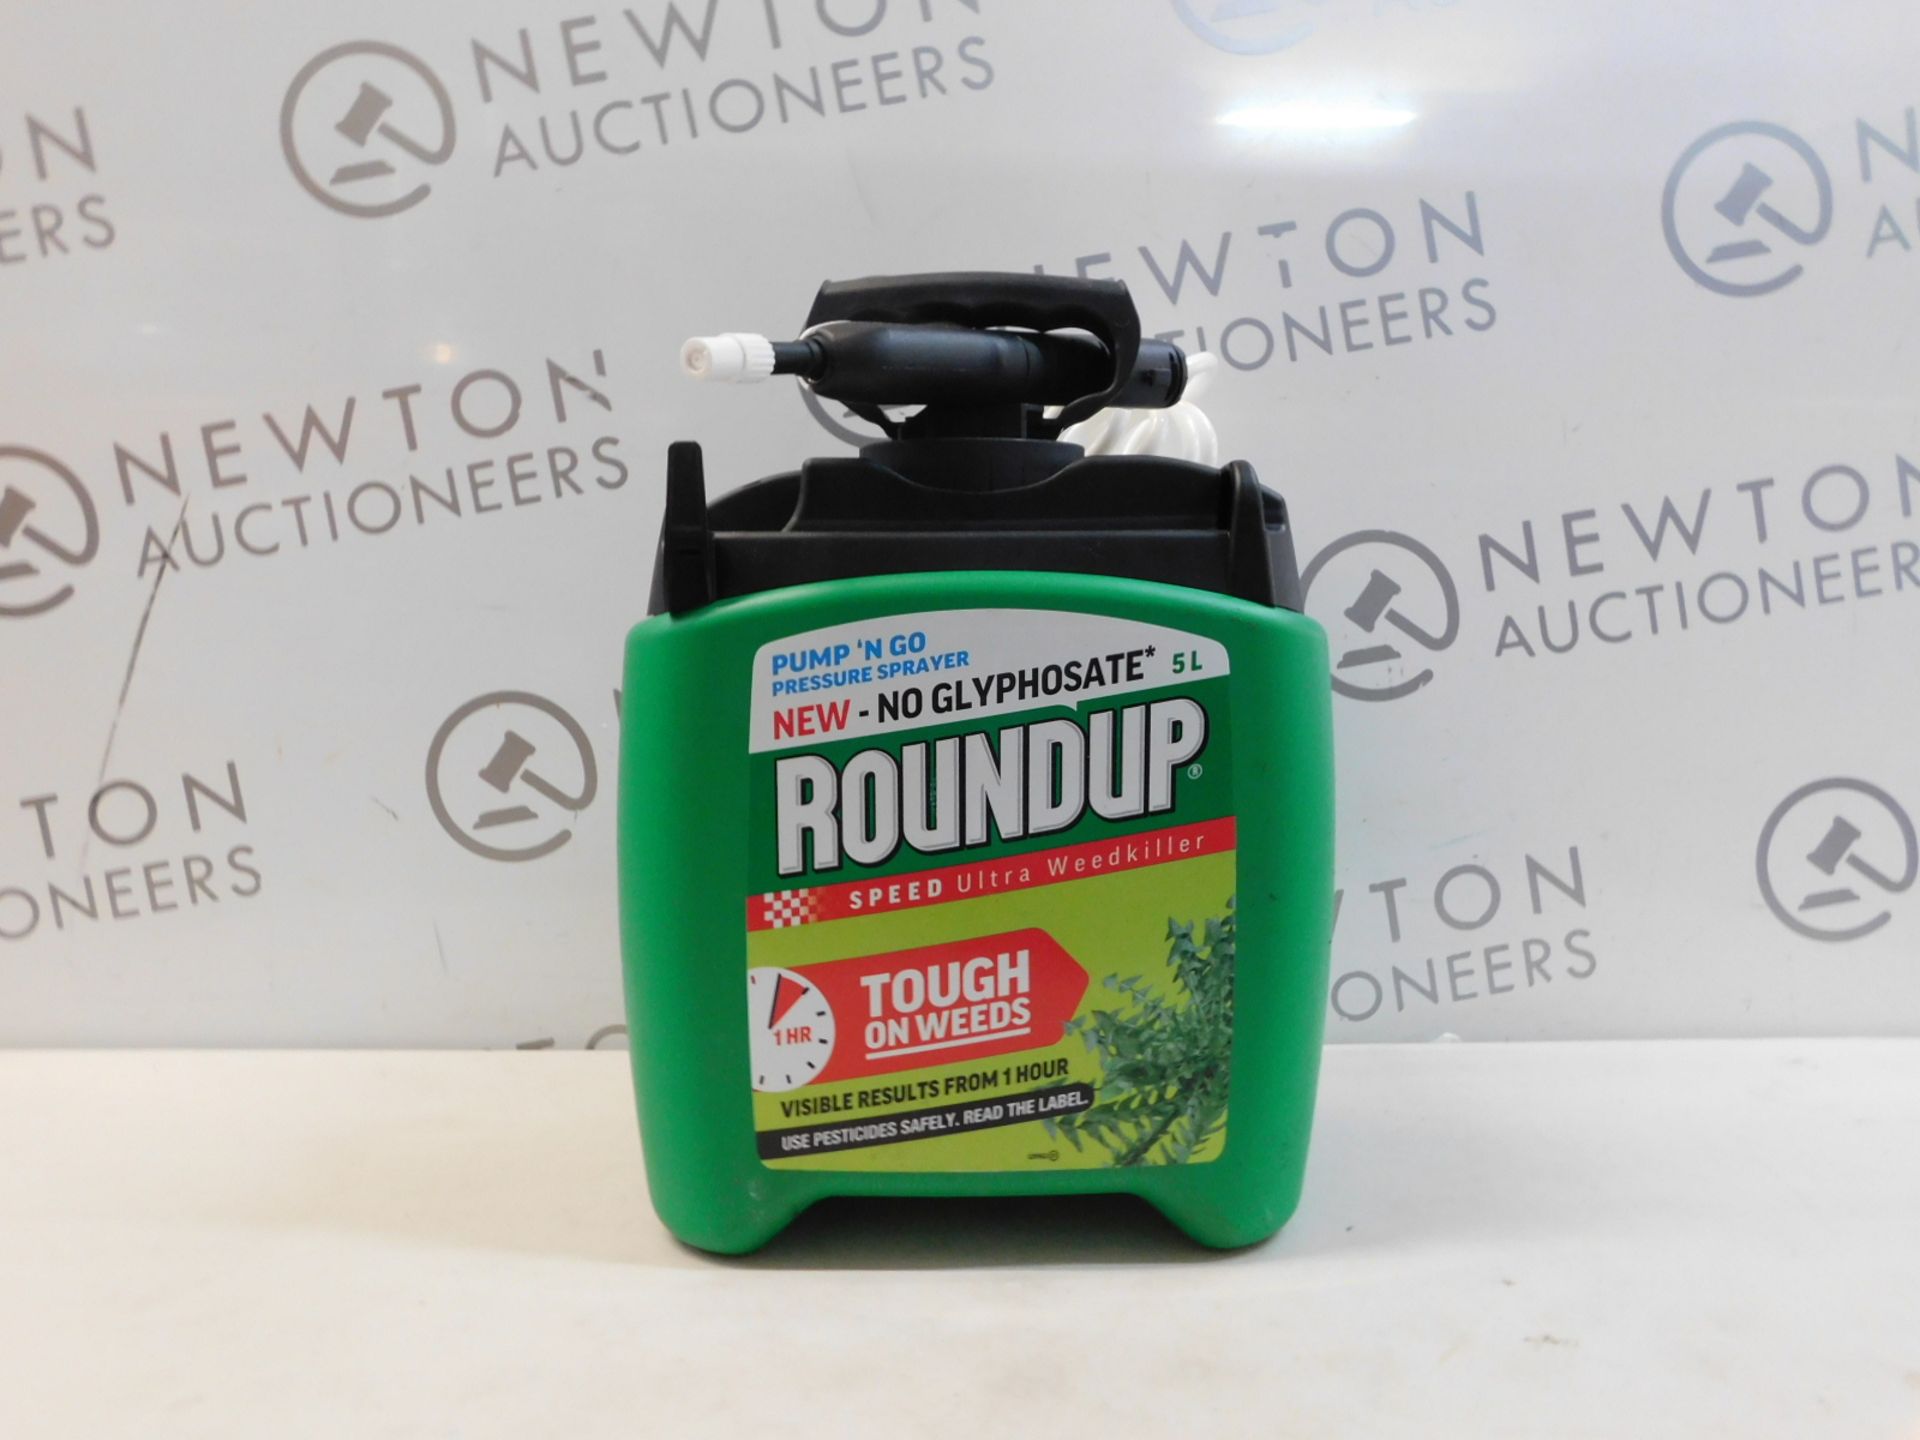 1 ROUND UP FAST ACTION PUMP 'N GO PRESSURE SPRAYER WEED KILLER 3L (APPROX) RRP Â£29.99